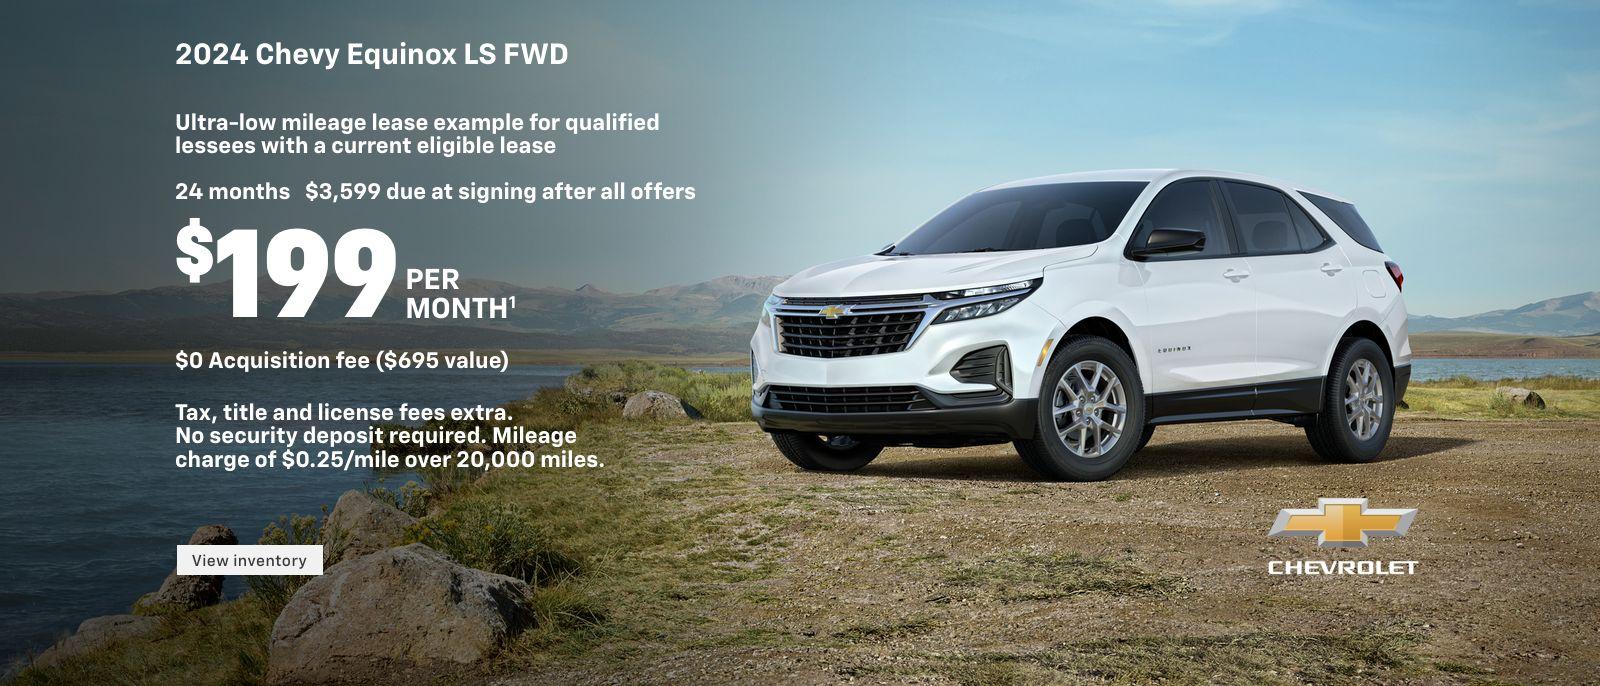 2024 Chevy Equinox LS FWD. Ultra-low mileage lease example for qualified lessees with a current eligible lease. $199 per month. 24 months. $3,599 due at signing after all offers. $0 Acquisition fee ($695 value). Tax, title and license fees extra. No security deposit required. Mileage charge of $0.25/mile over 20,000 miles.